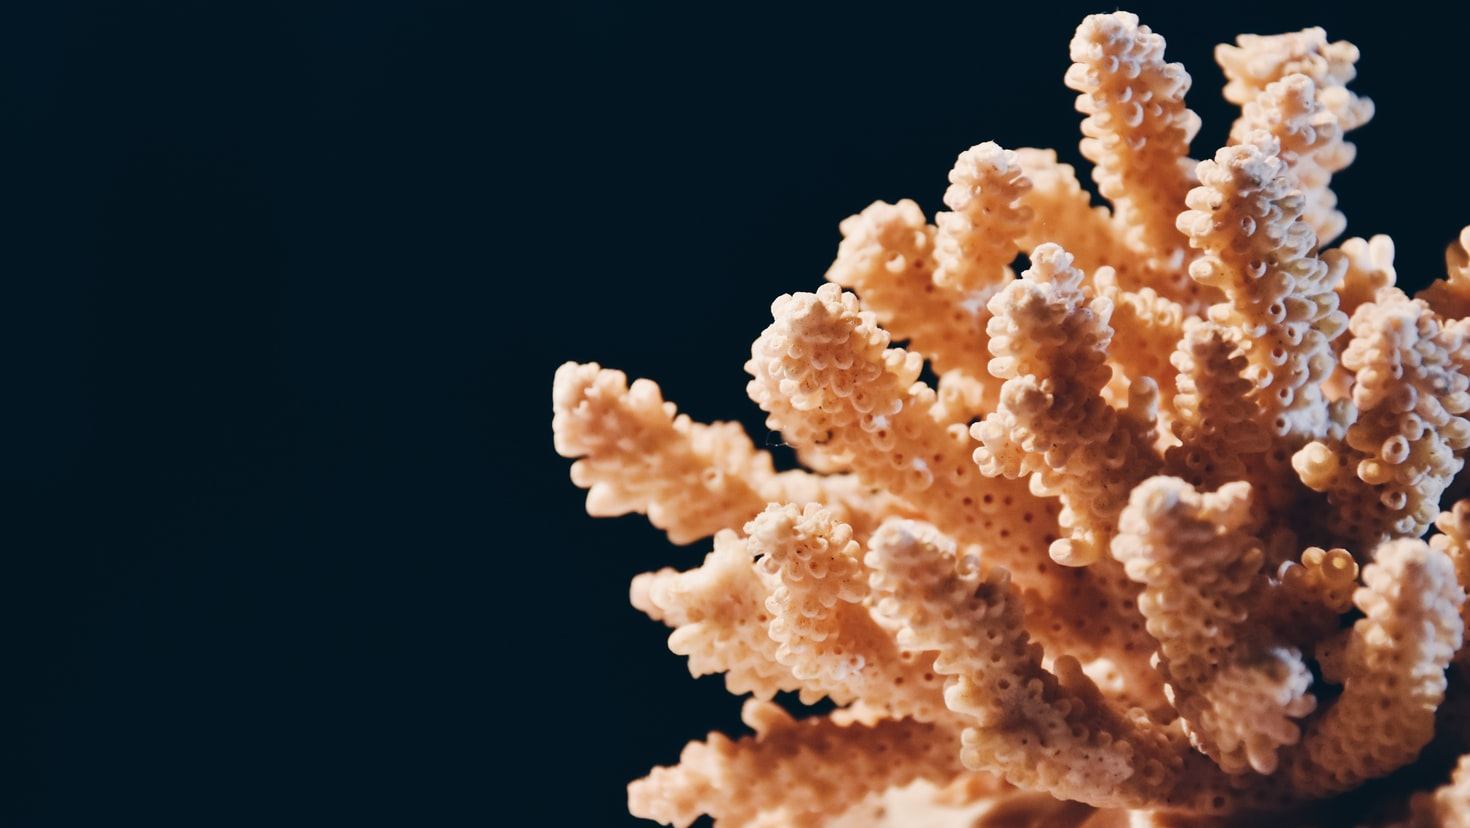 Could 3D printing fast-track coral restoration?